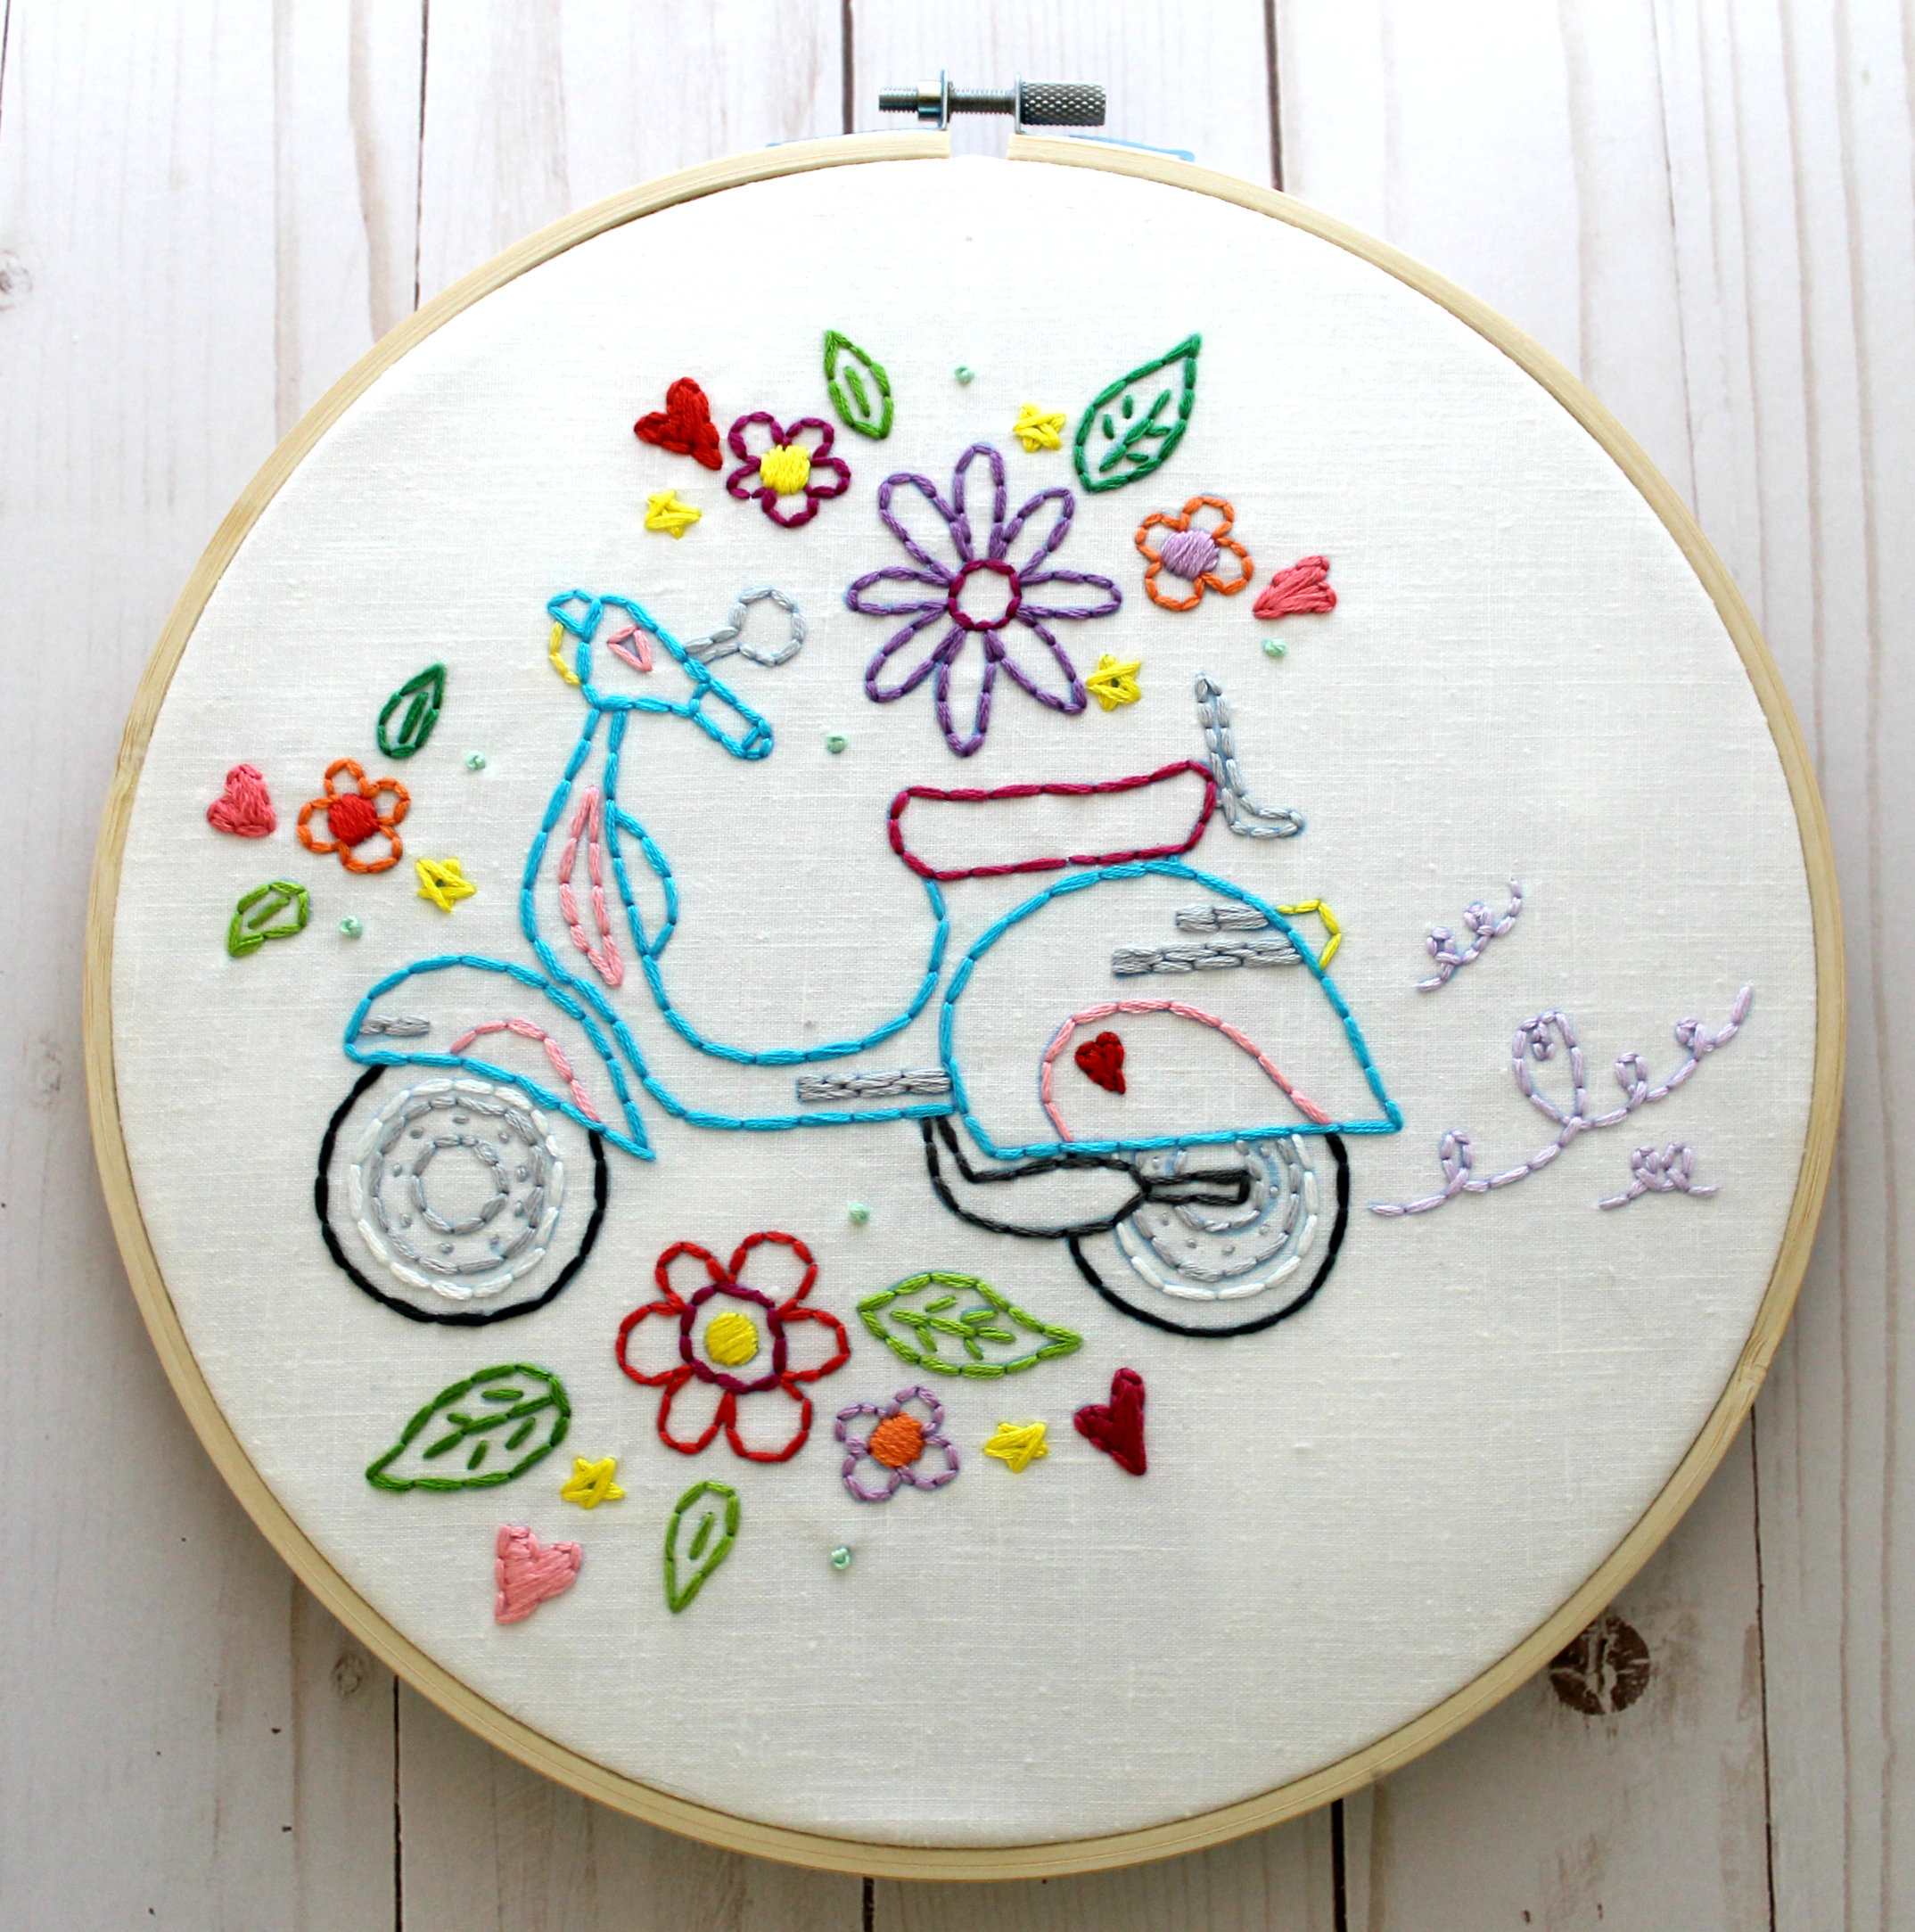 How To Design Embroidery Patterns By Hand Retro Scooter Hand Embroidery Pattern Embroidery Designs Embroidery Transfer Digital Pattern Summer Vespa Scooter Vintage Scooter